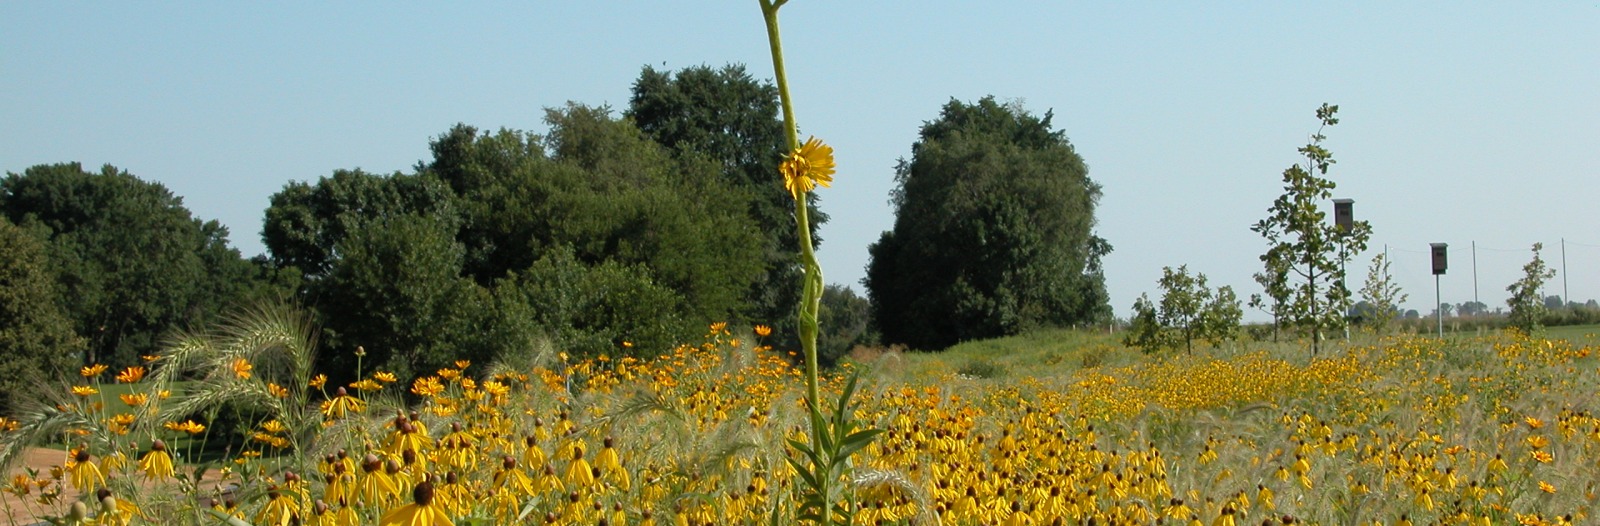 prairie grasses and forbs with yellow blooms and dark green trees in the background